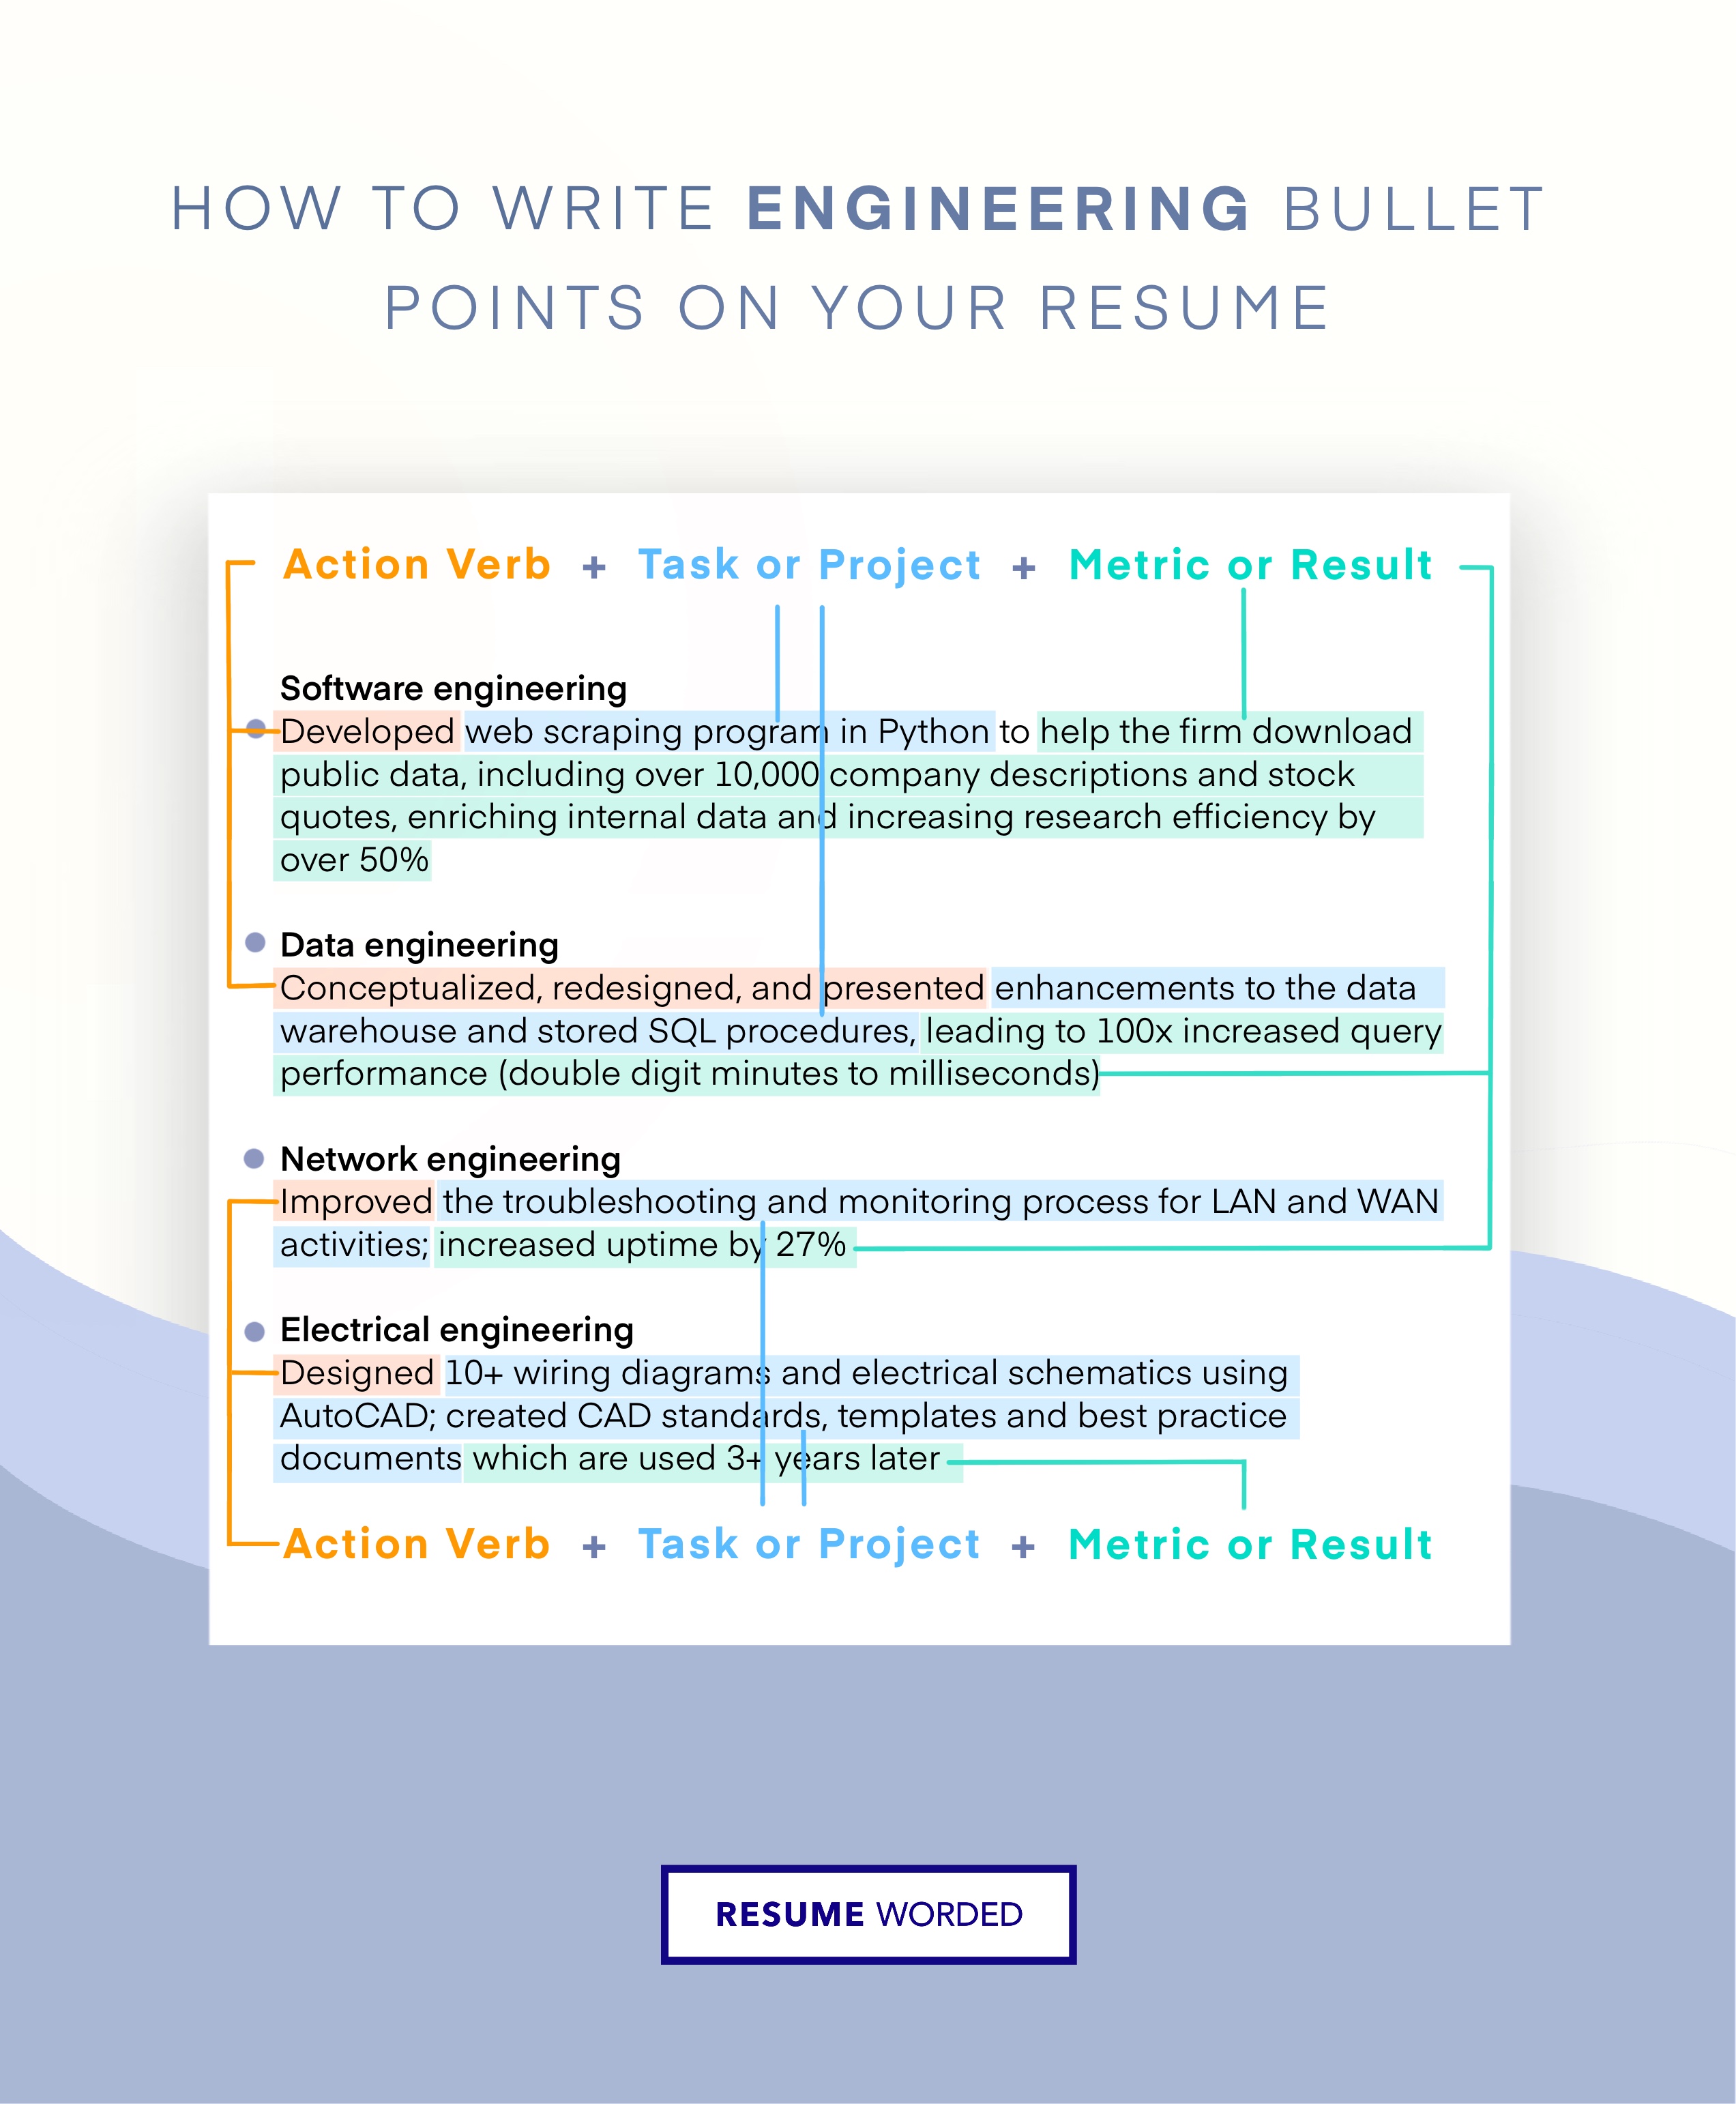 Focus on technical skills to highlight your potential. - Cloud Solutions Architect Resume